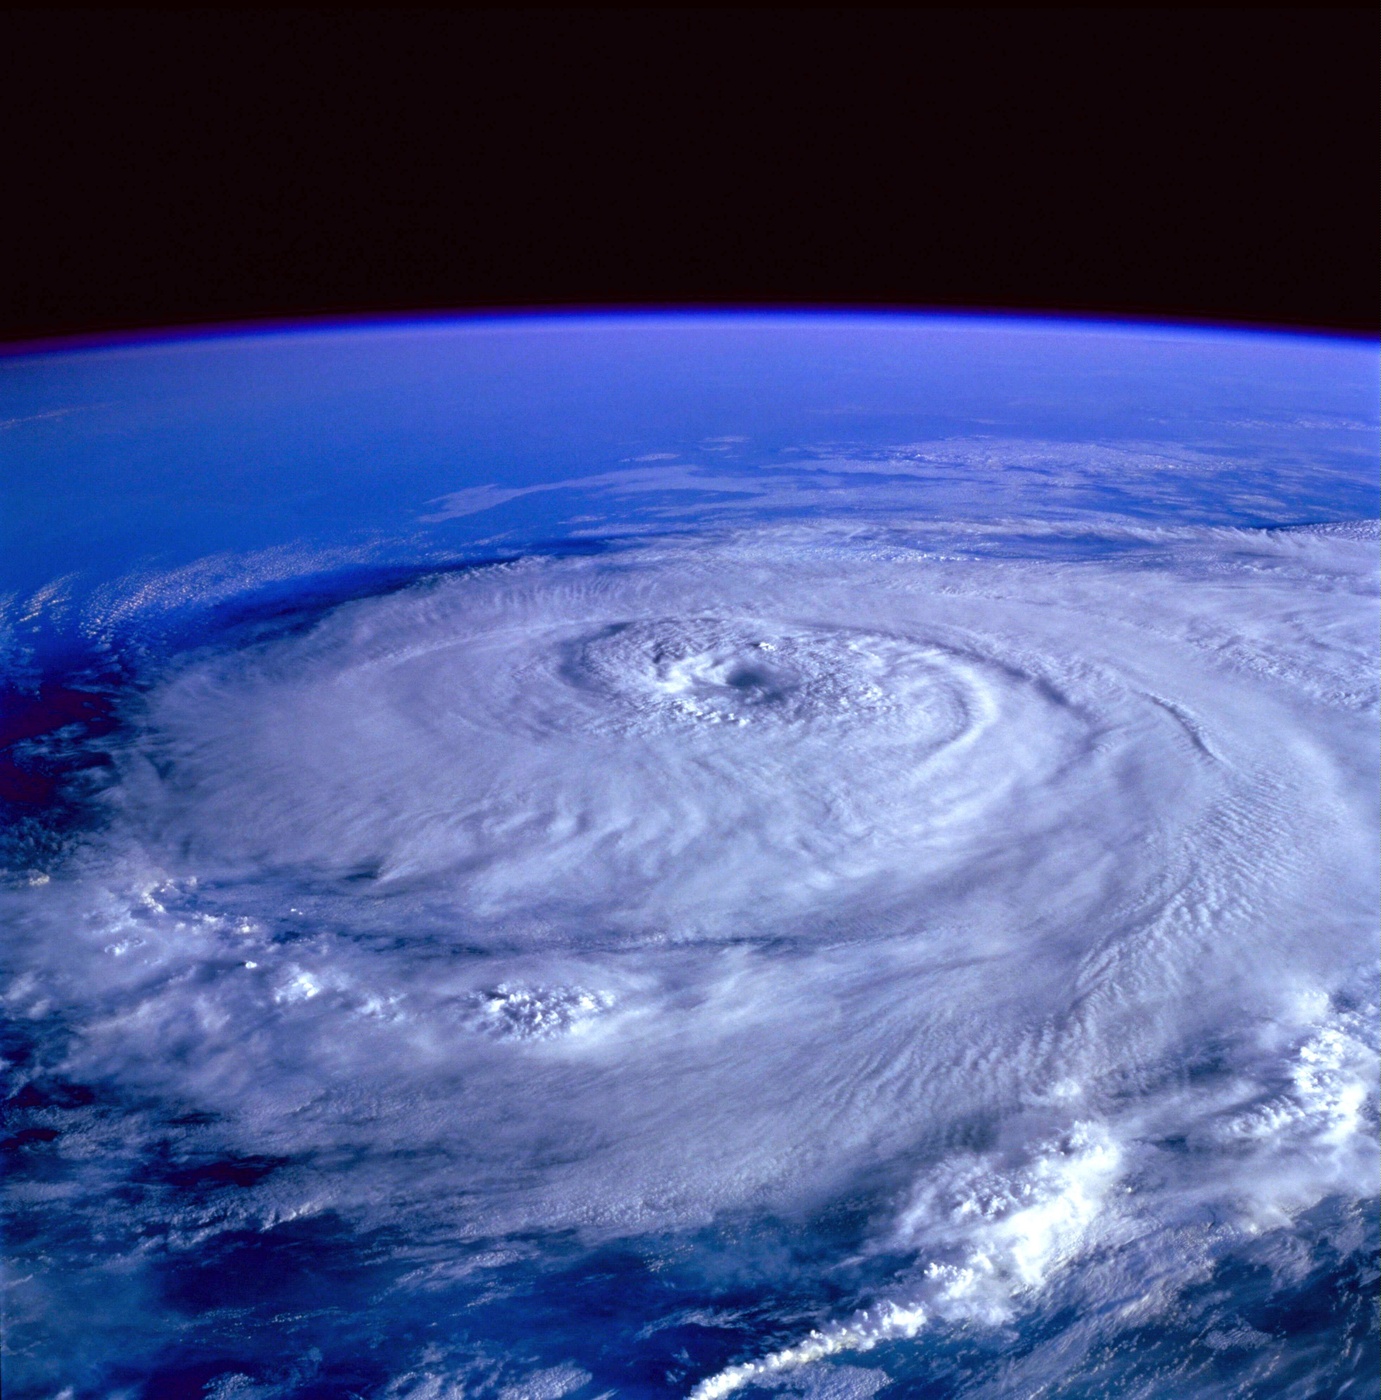 A fifth higher: Tropical cyclones substantially raise the Social Cost of Carbon